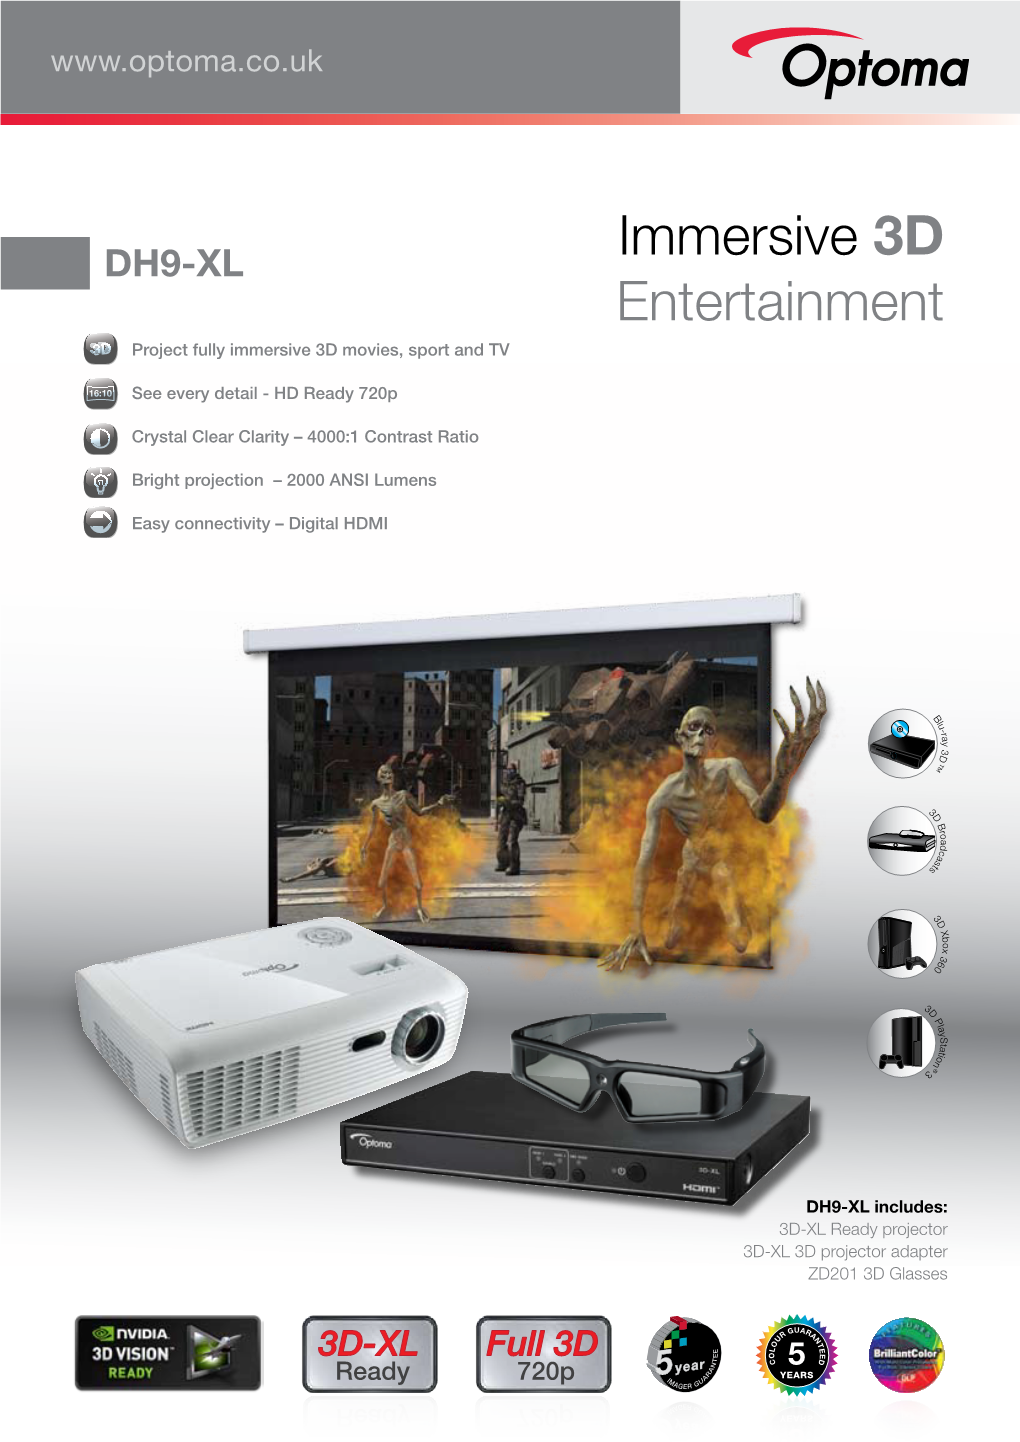 Immersive 3D Entertainment Project Fully Immersive 3D Movies, Sport and TV